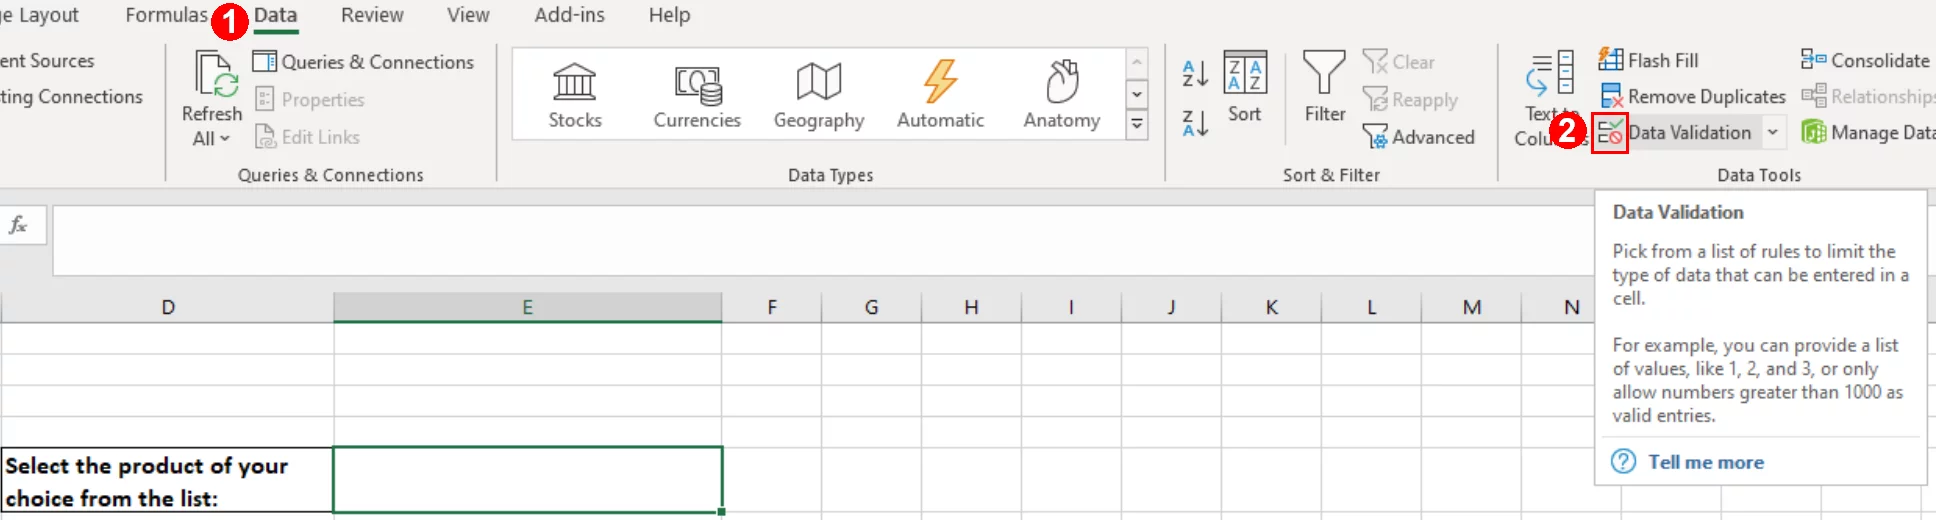 Screenshot showing the Data Validation option in the Data Tools group on the Data tab